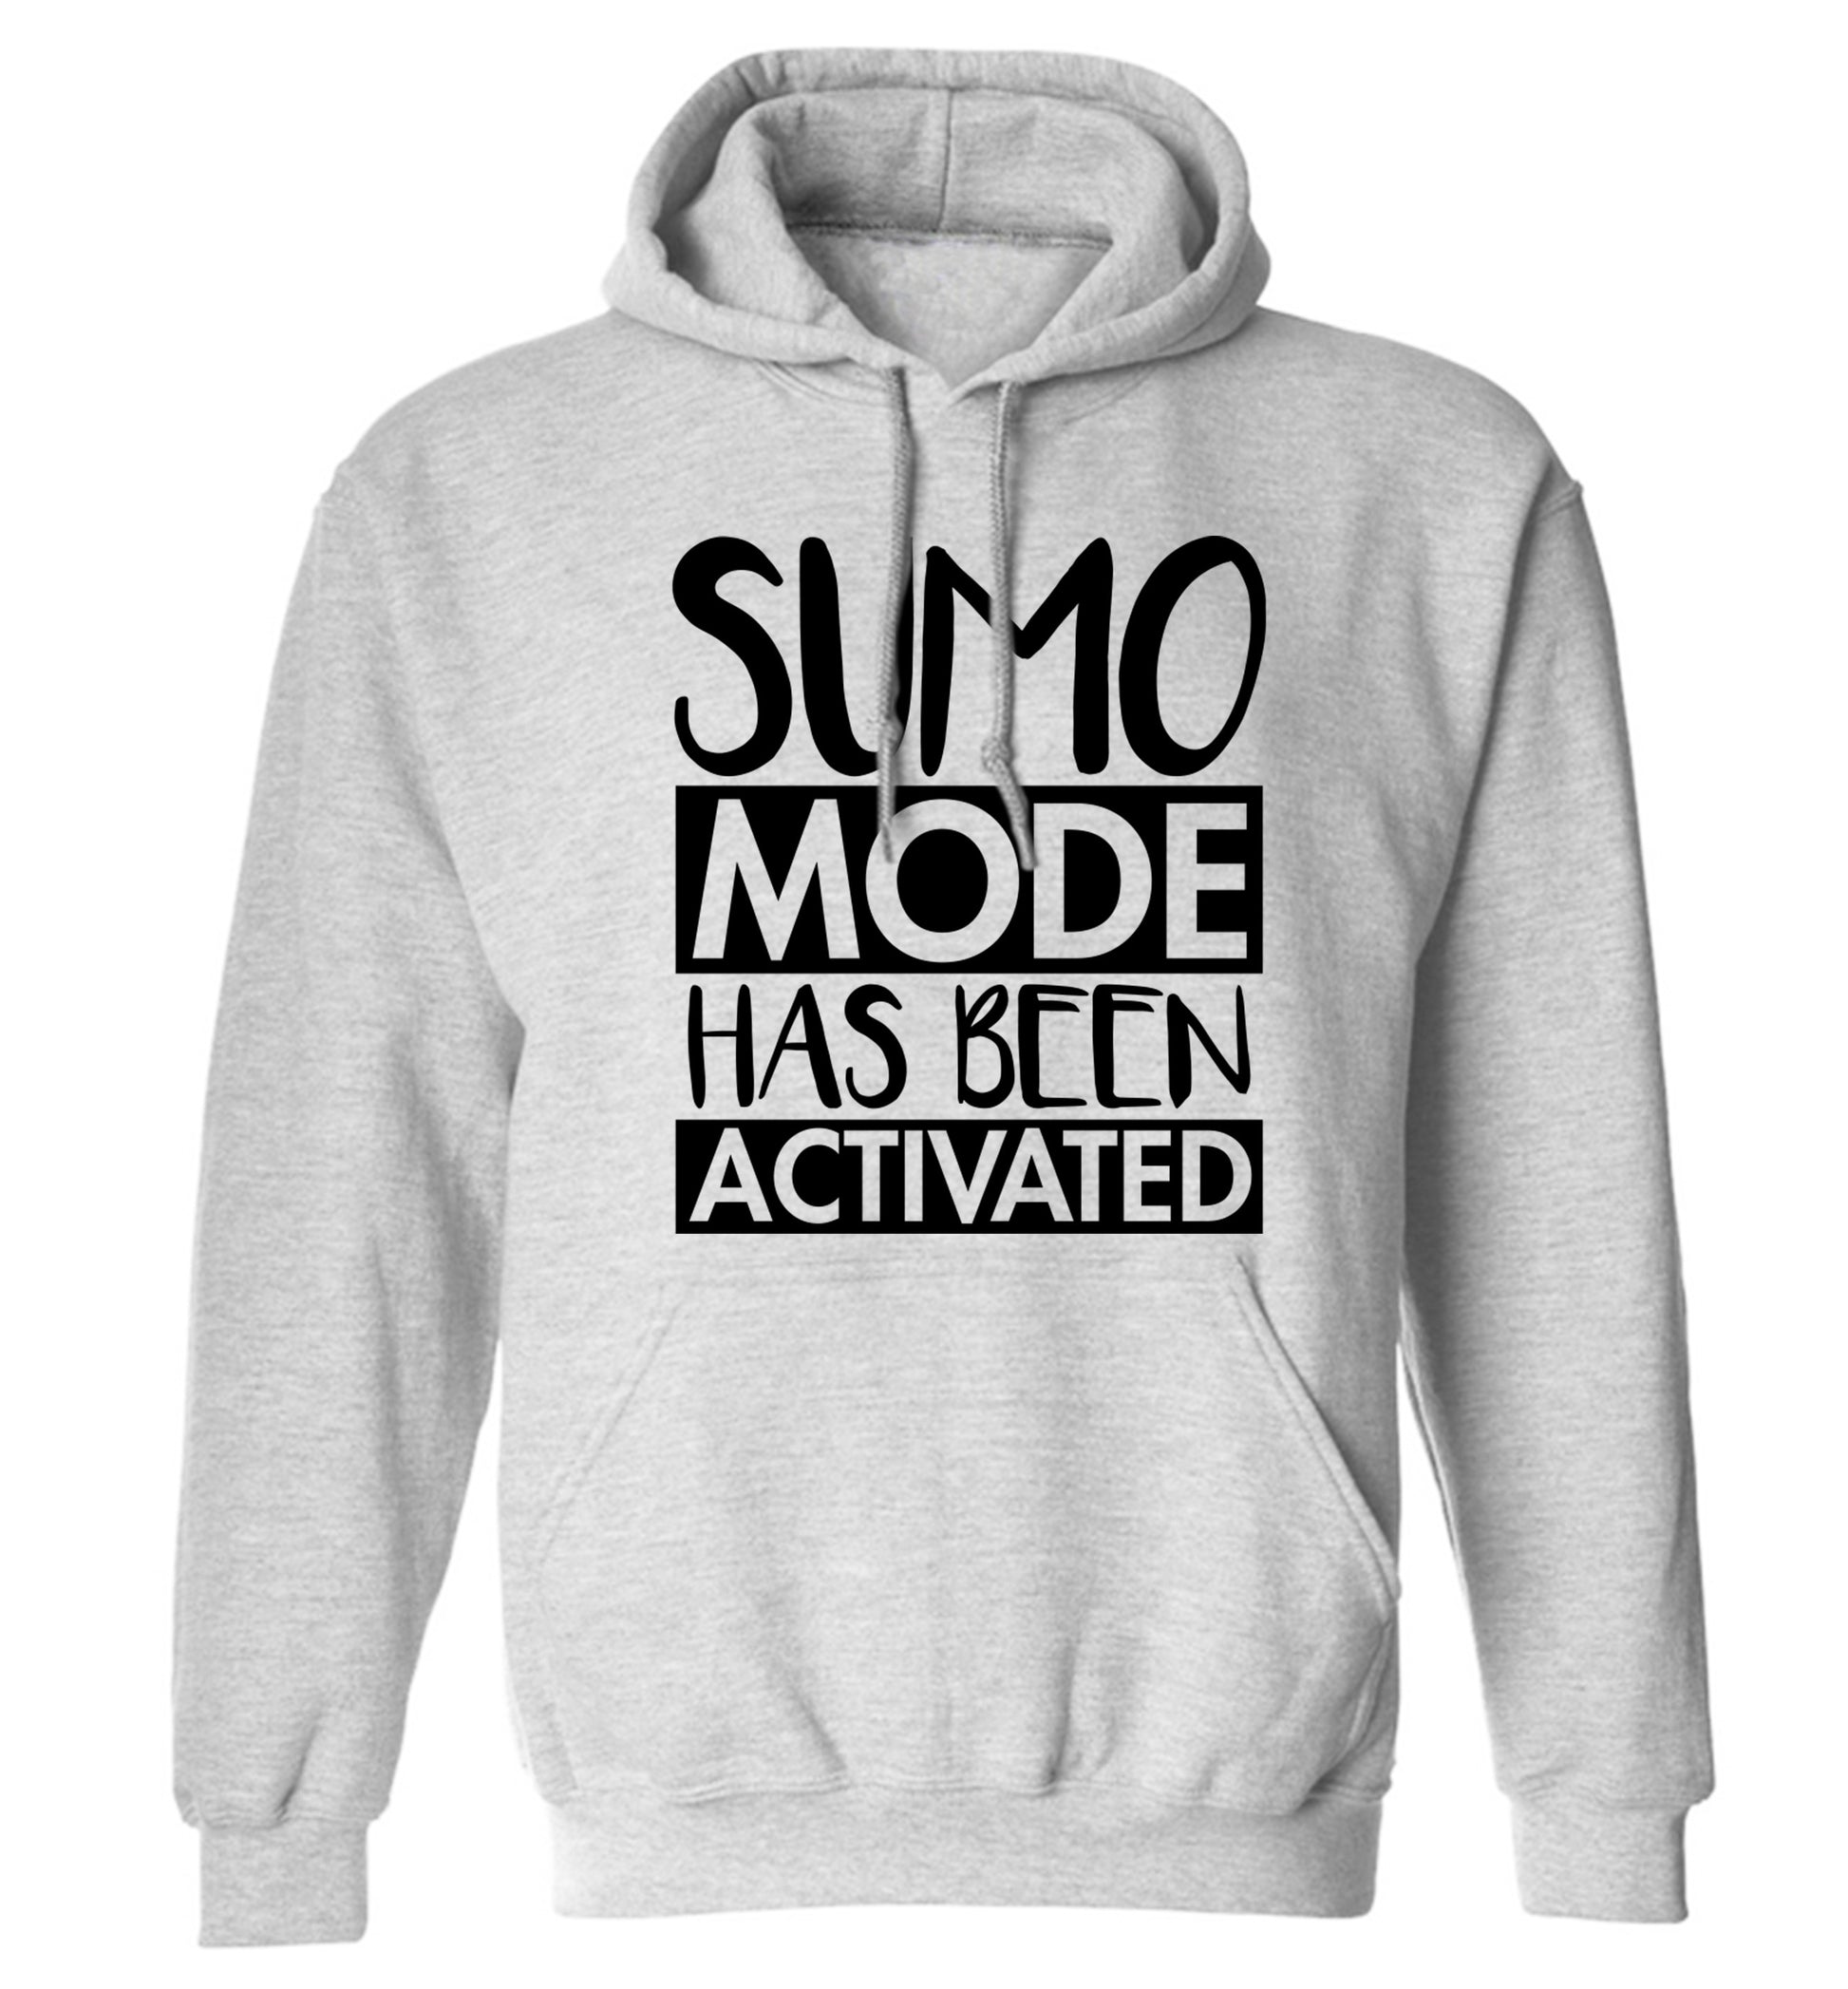 Sumo mode activated adults unisex grey hoodie 2XL